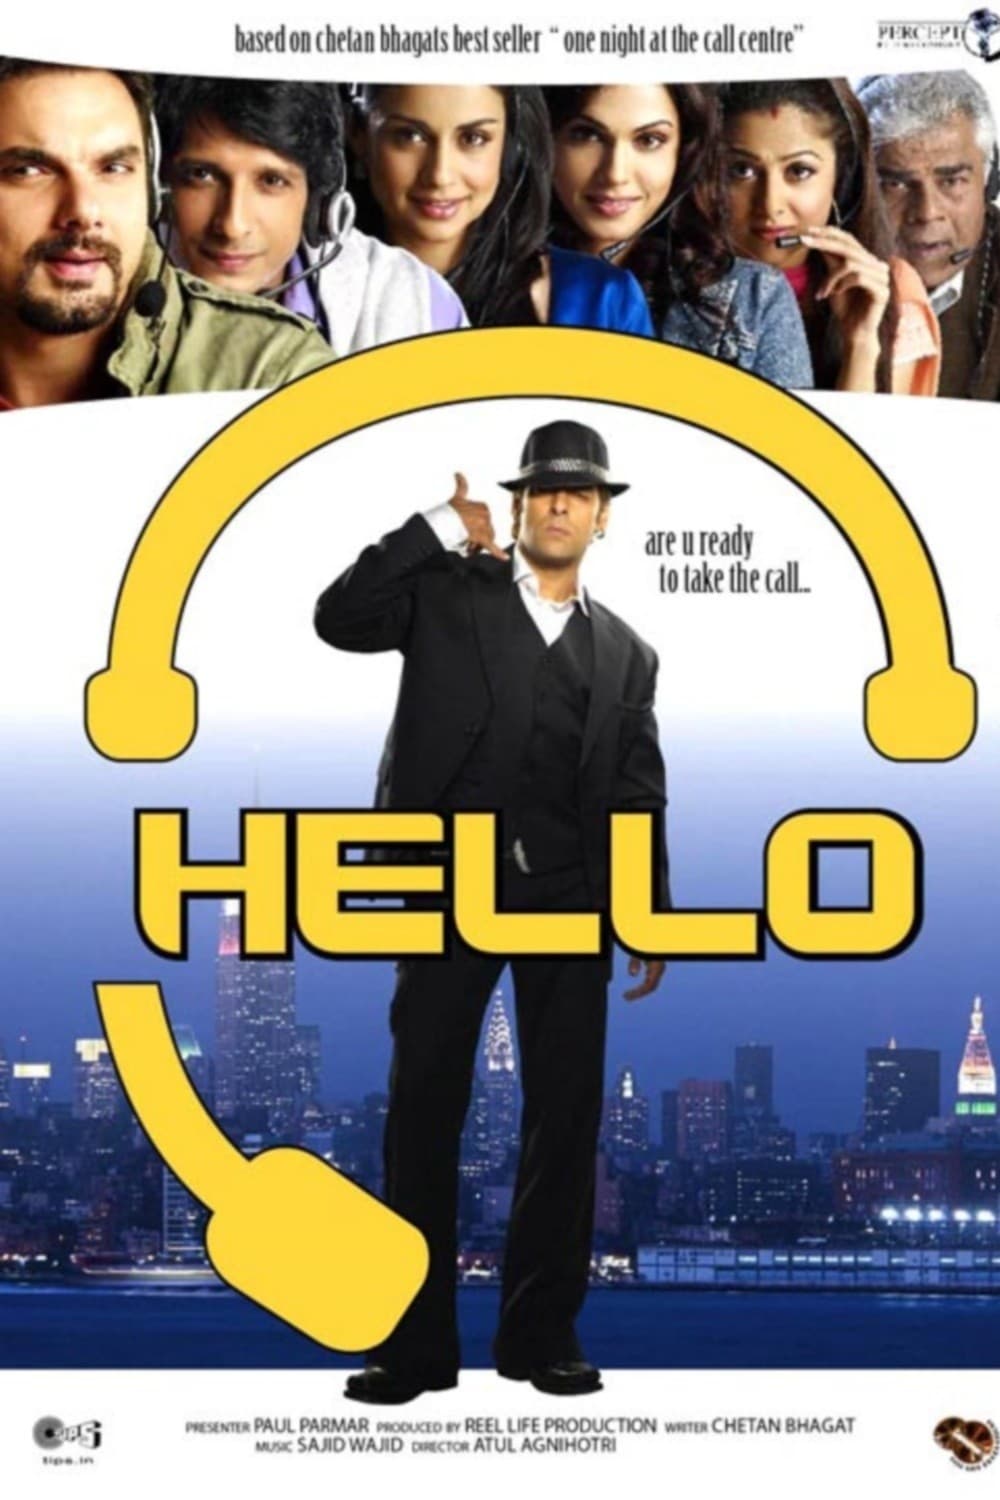 Poster for the movie "Hello"